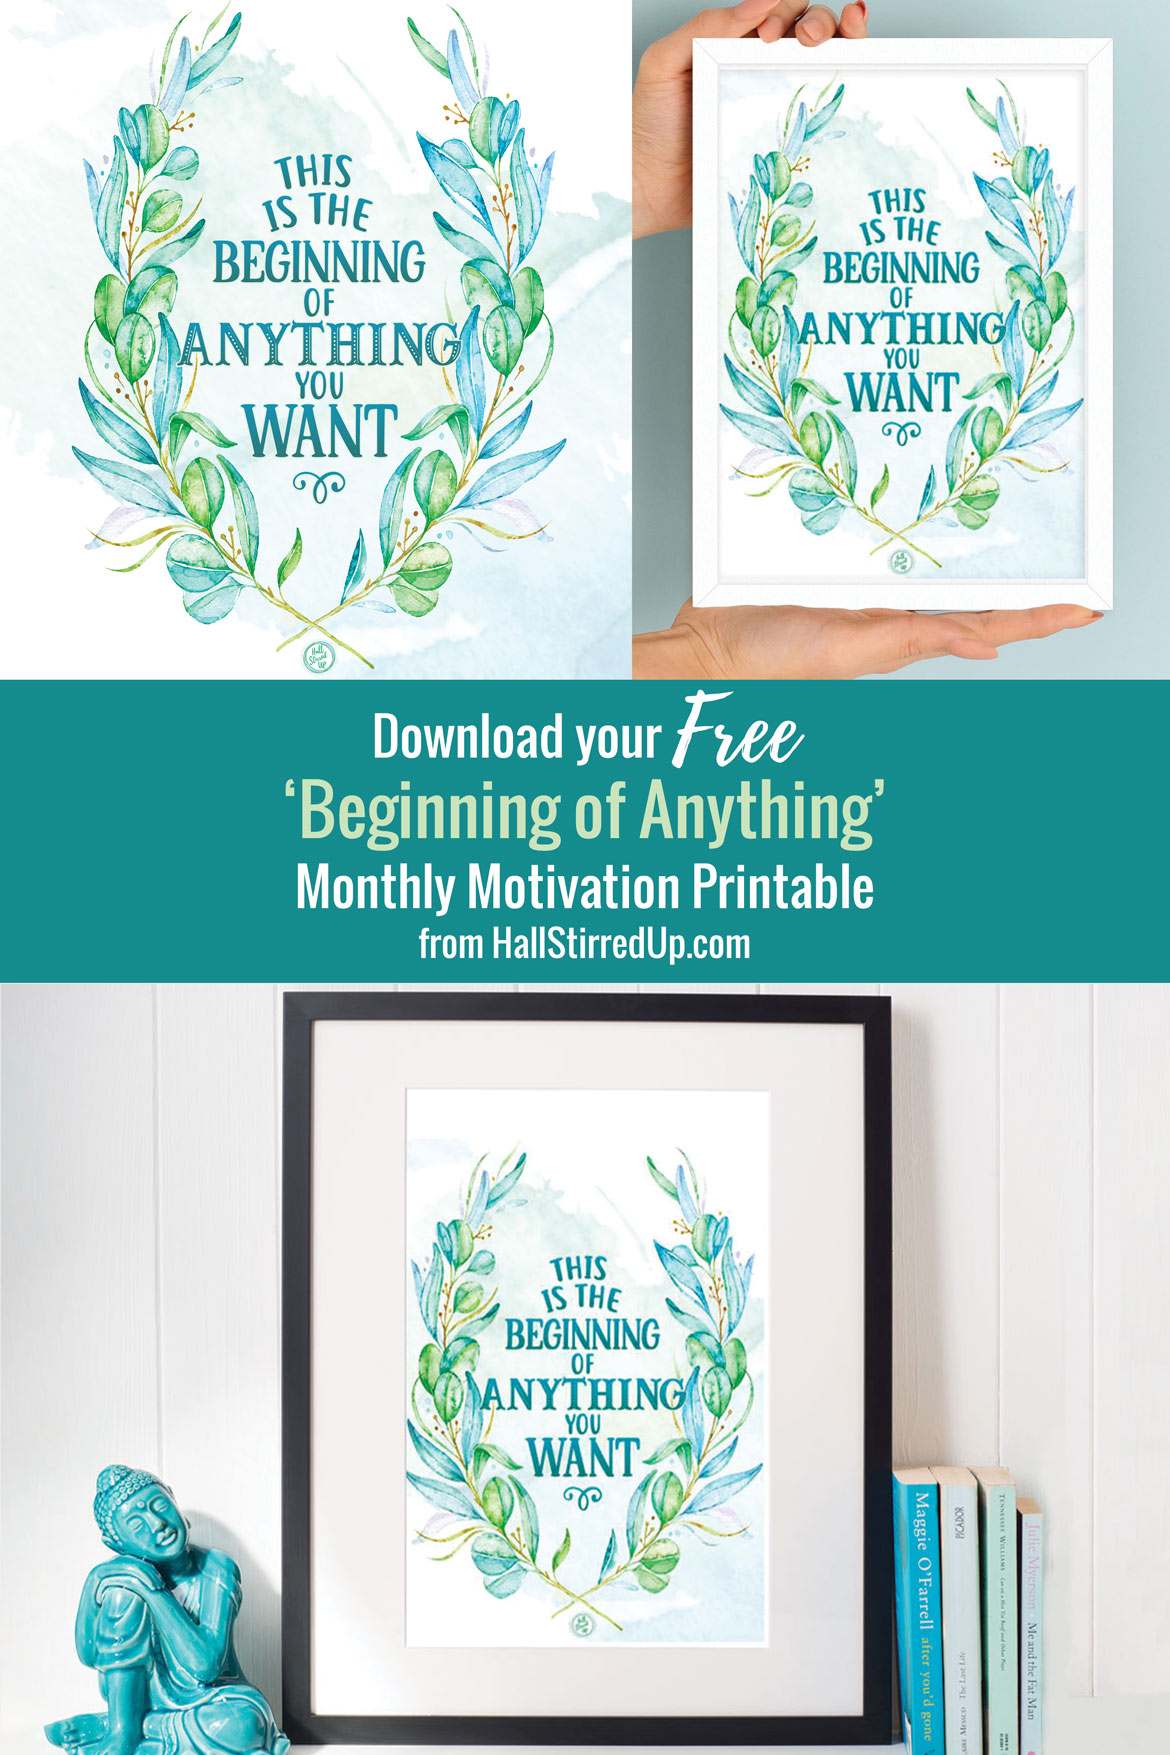 Unlock your potential with a new mindset Includes Beginning of Anything free printable